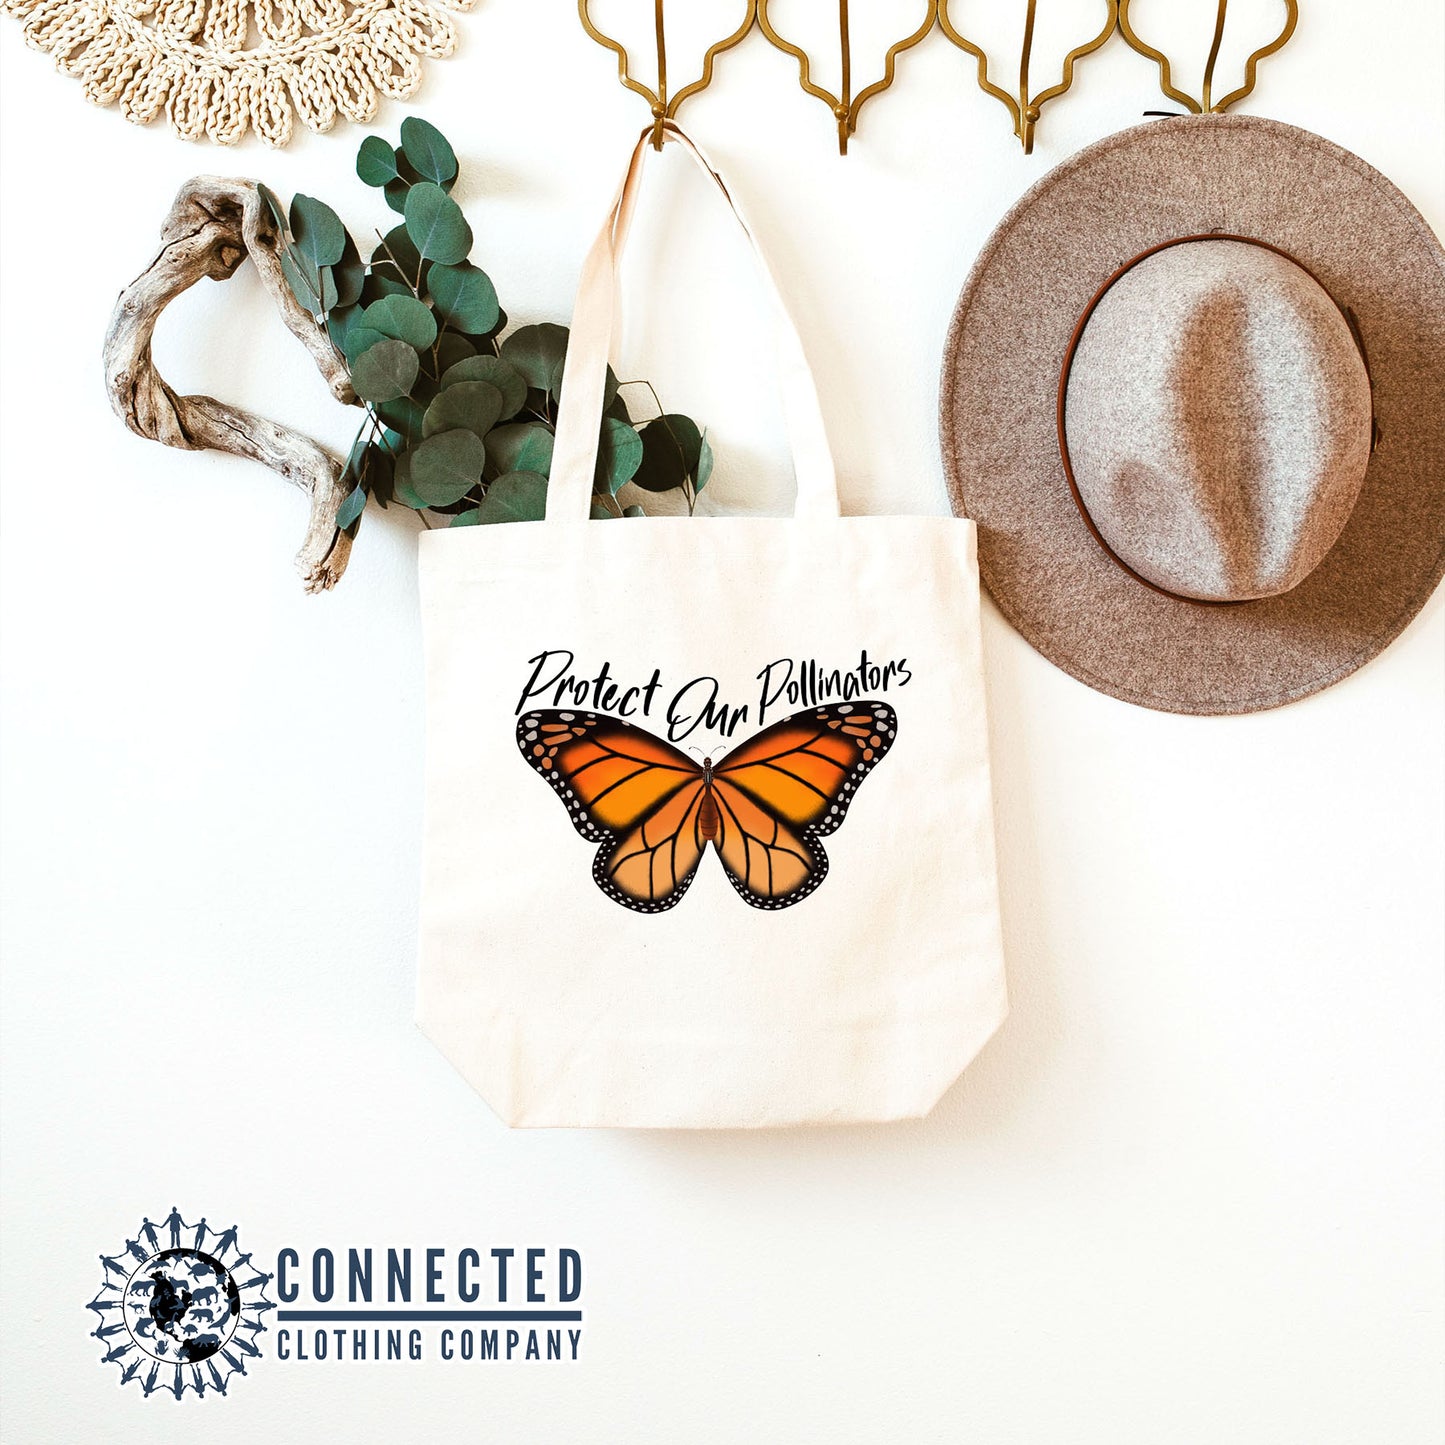 Protect Our Pollinators Tote Bag - Connected Clothing Company - 10% of proceeds donated to save the monarch butterflies